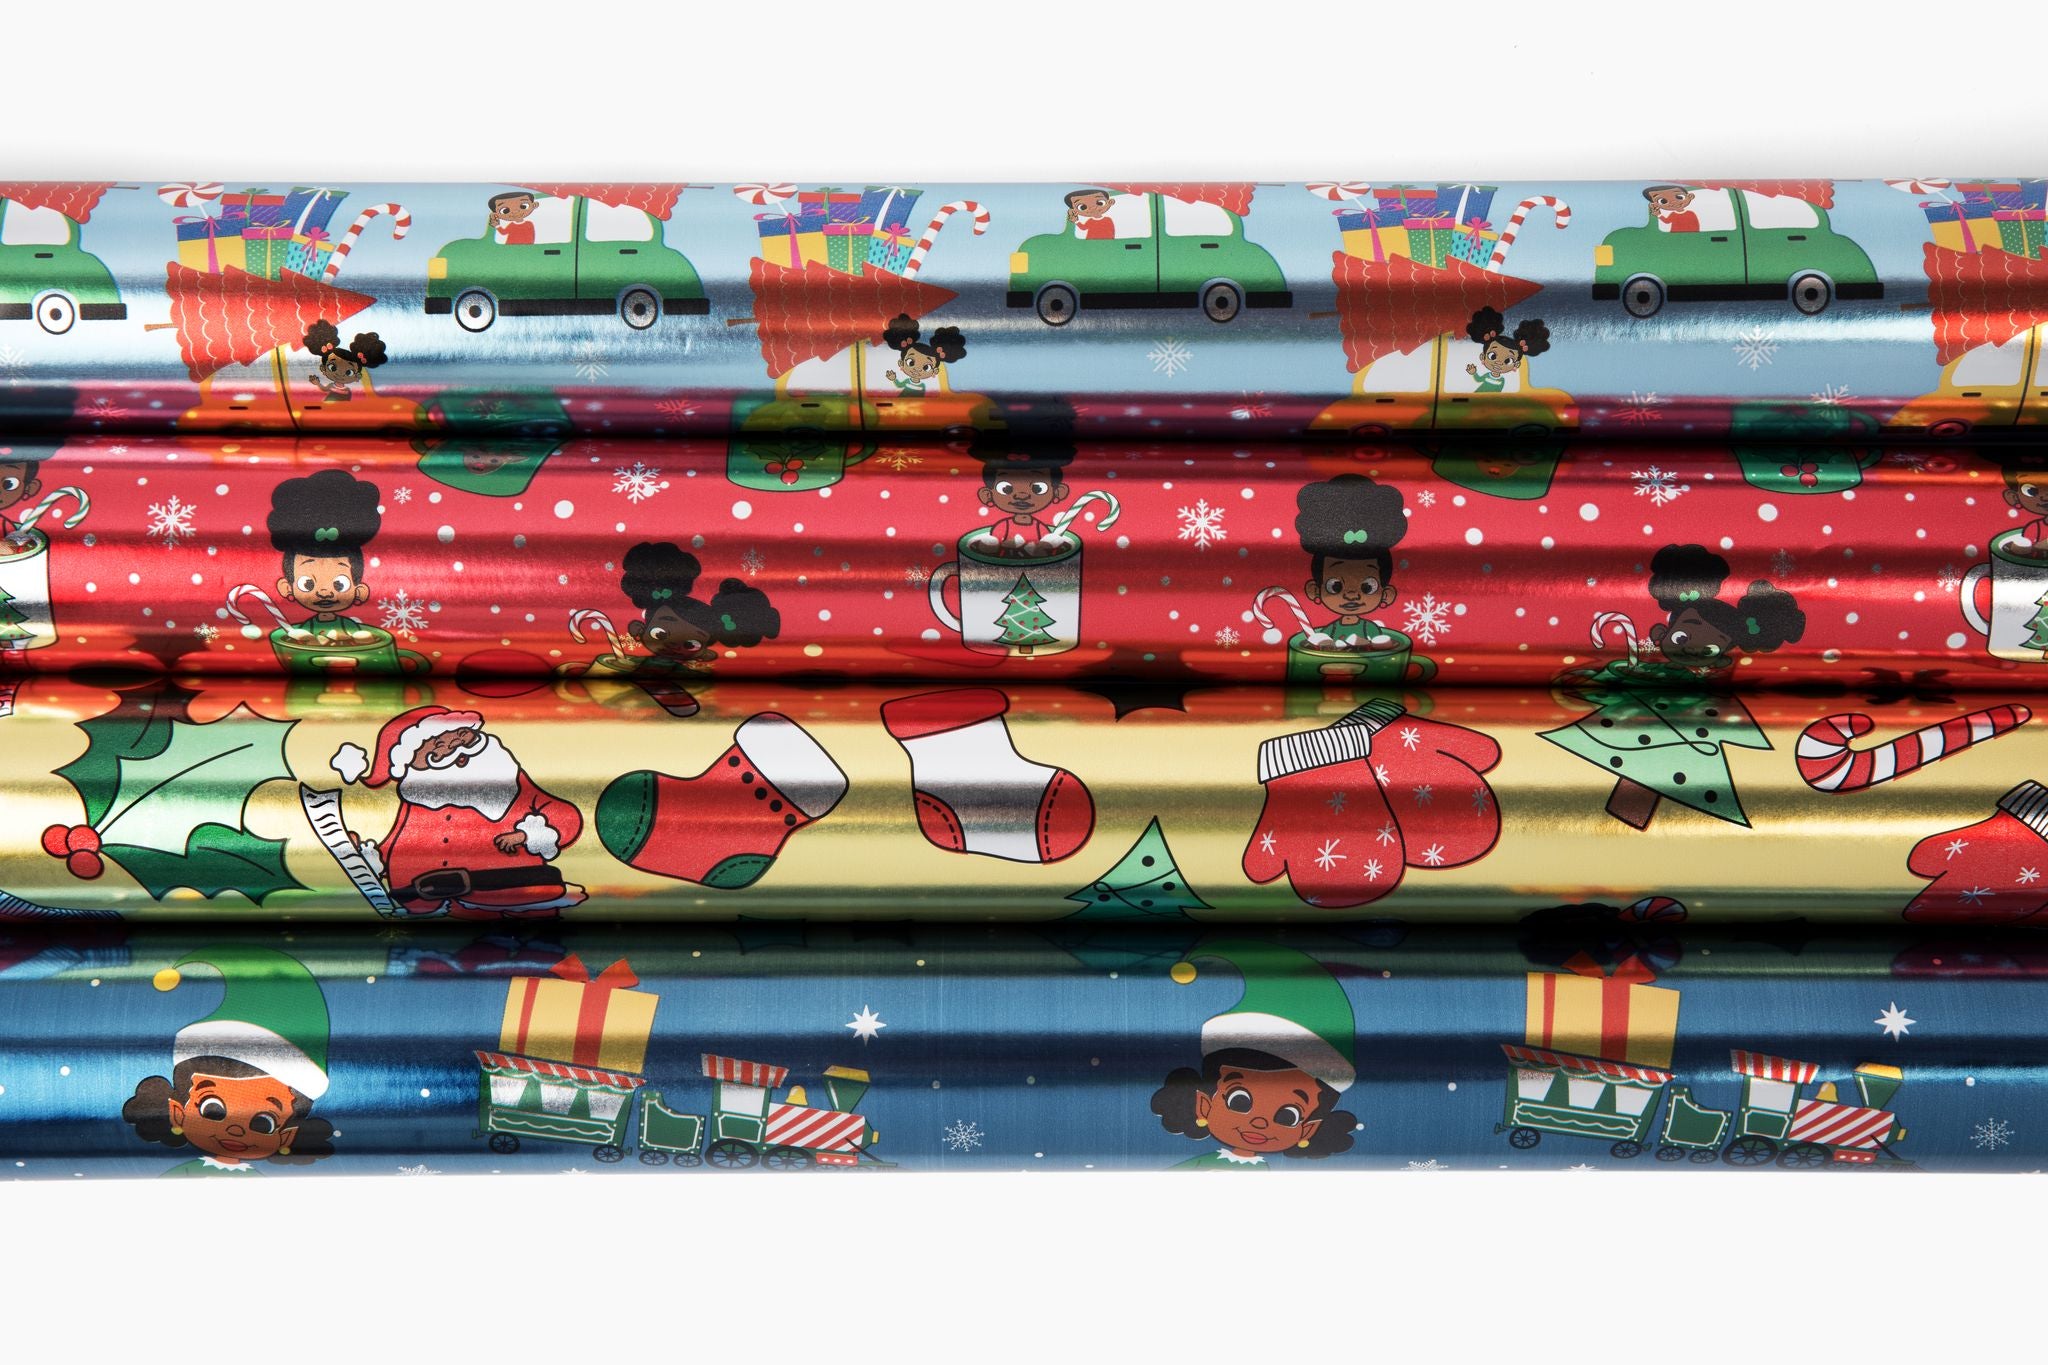 Wrap- 4 Pack Metallic Holiday Gift Wrap Set – Black Paper Party